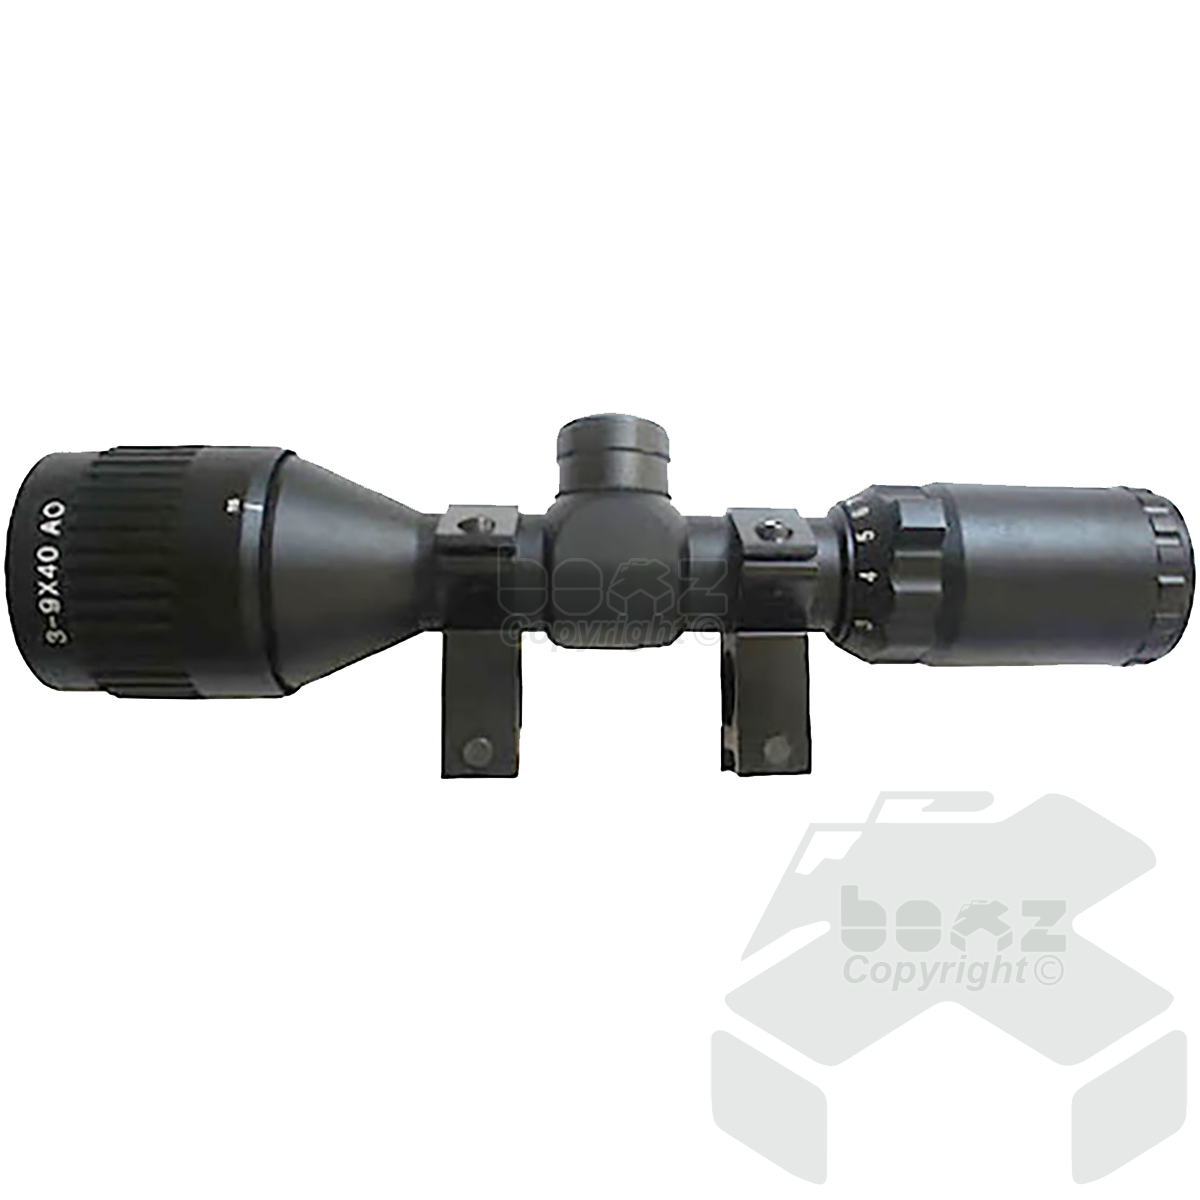 London Armoury Resurrection 3-9x40 AO Extra Compact Riflescope with Two-piece Mounts